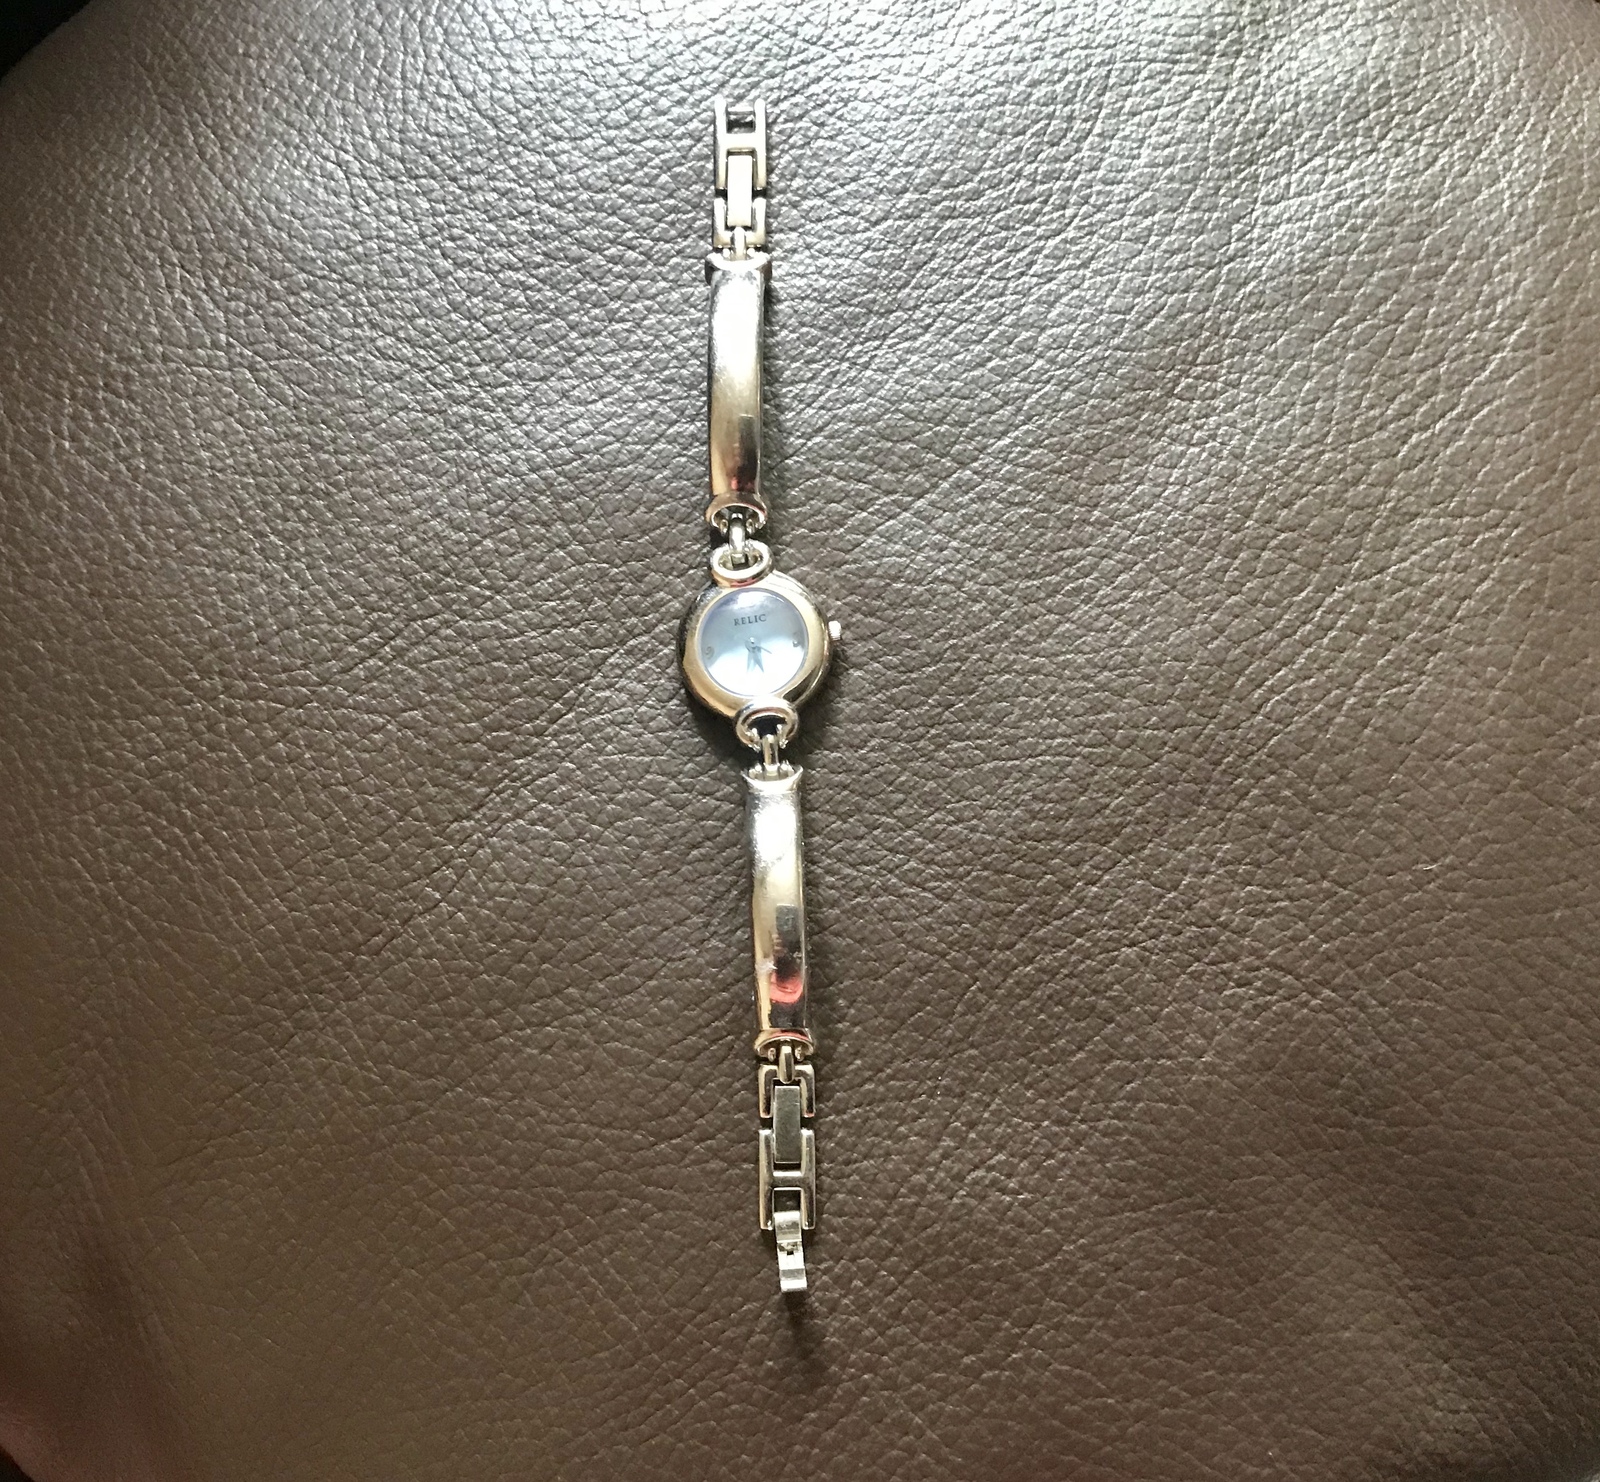 Relic Watch by Fossil and 50 similar items